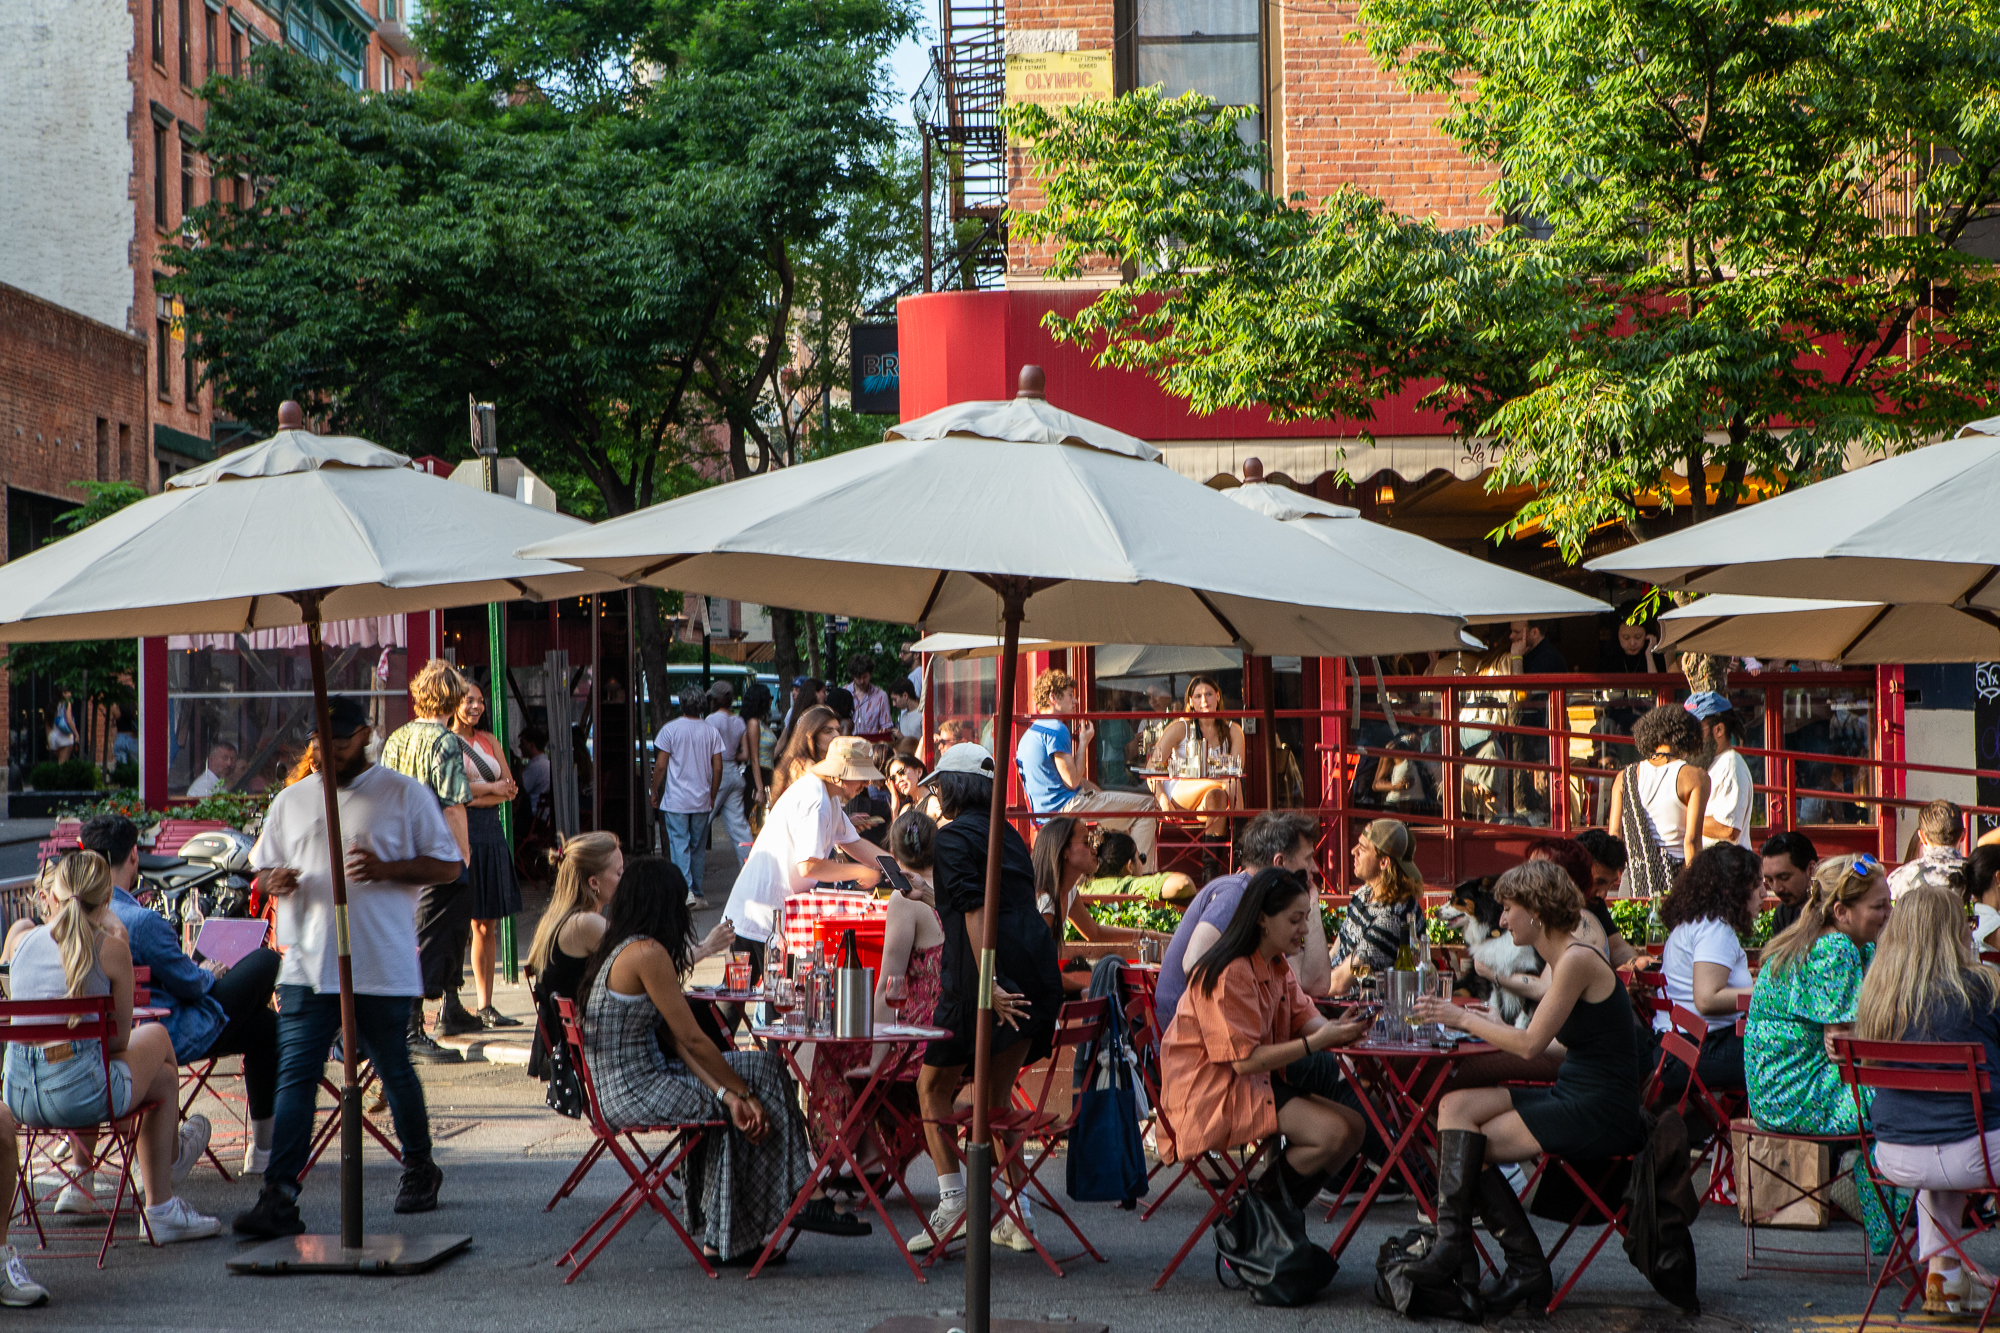 A group of people participate in New York City's outdoor dining.